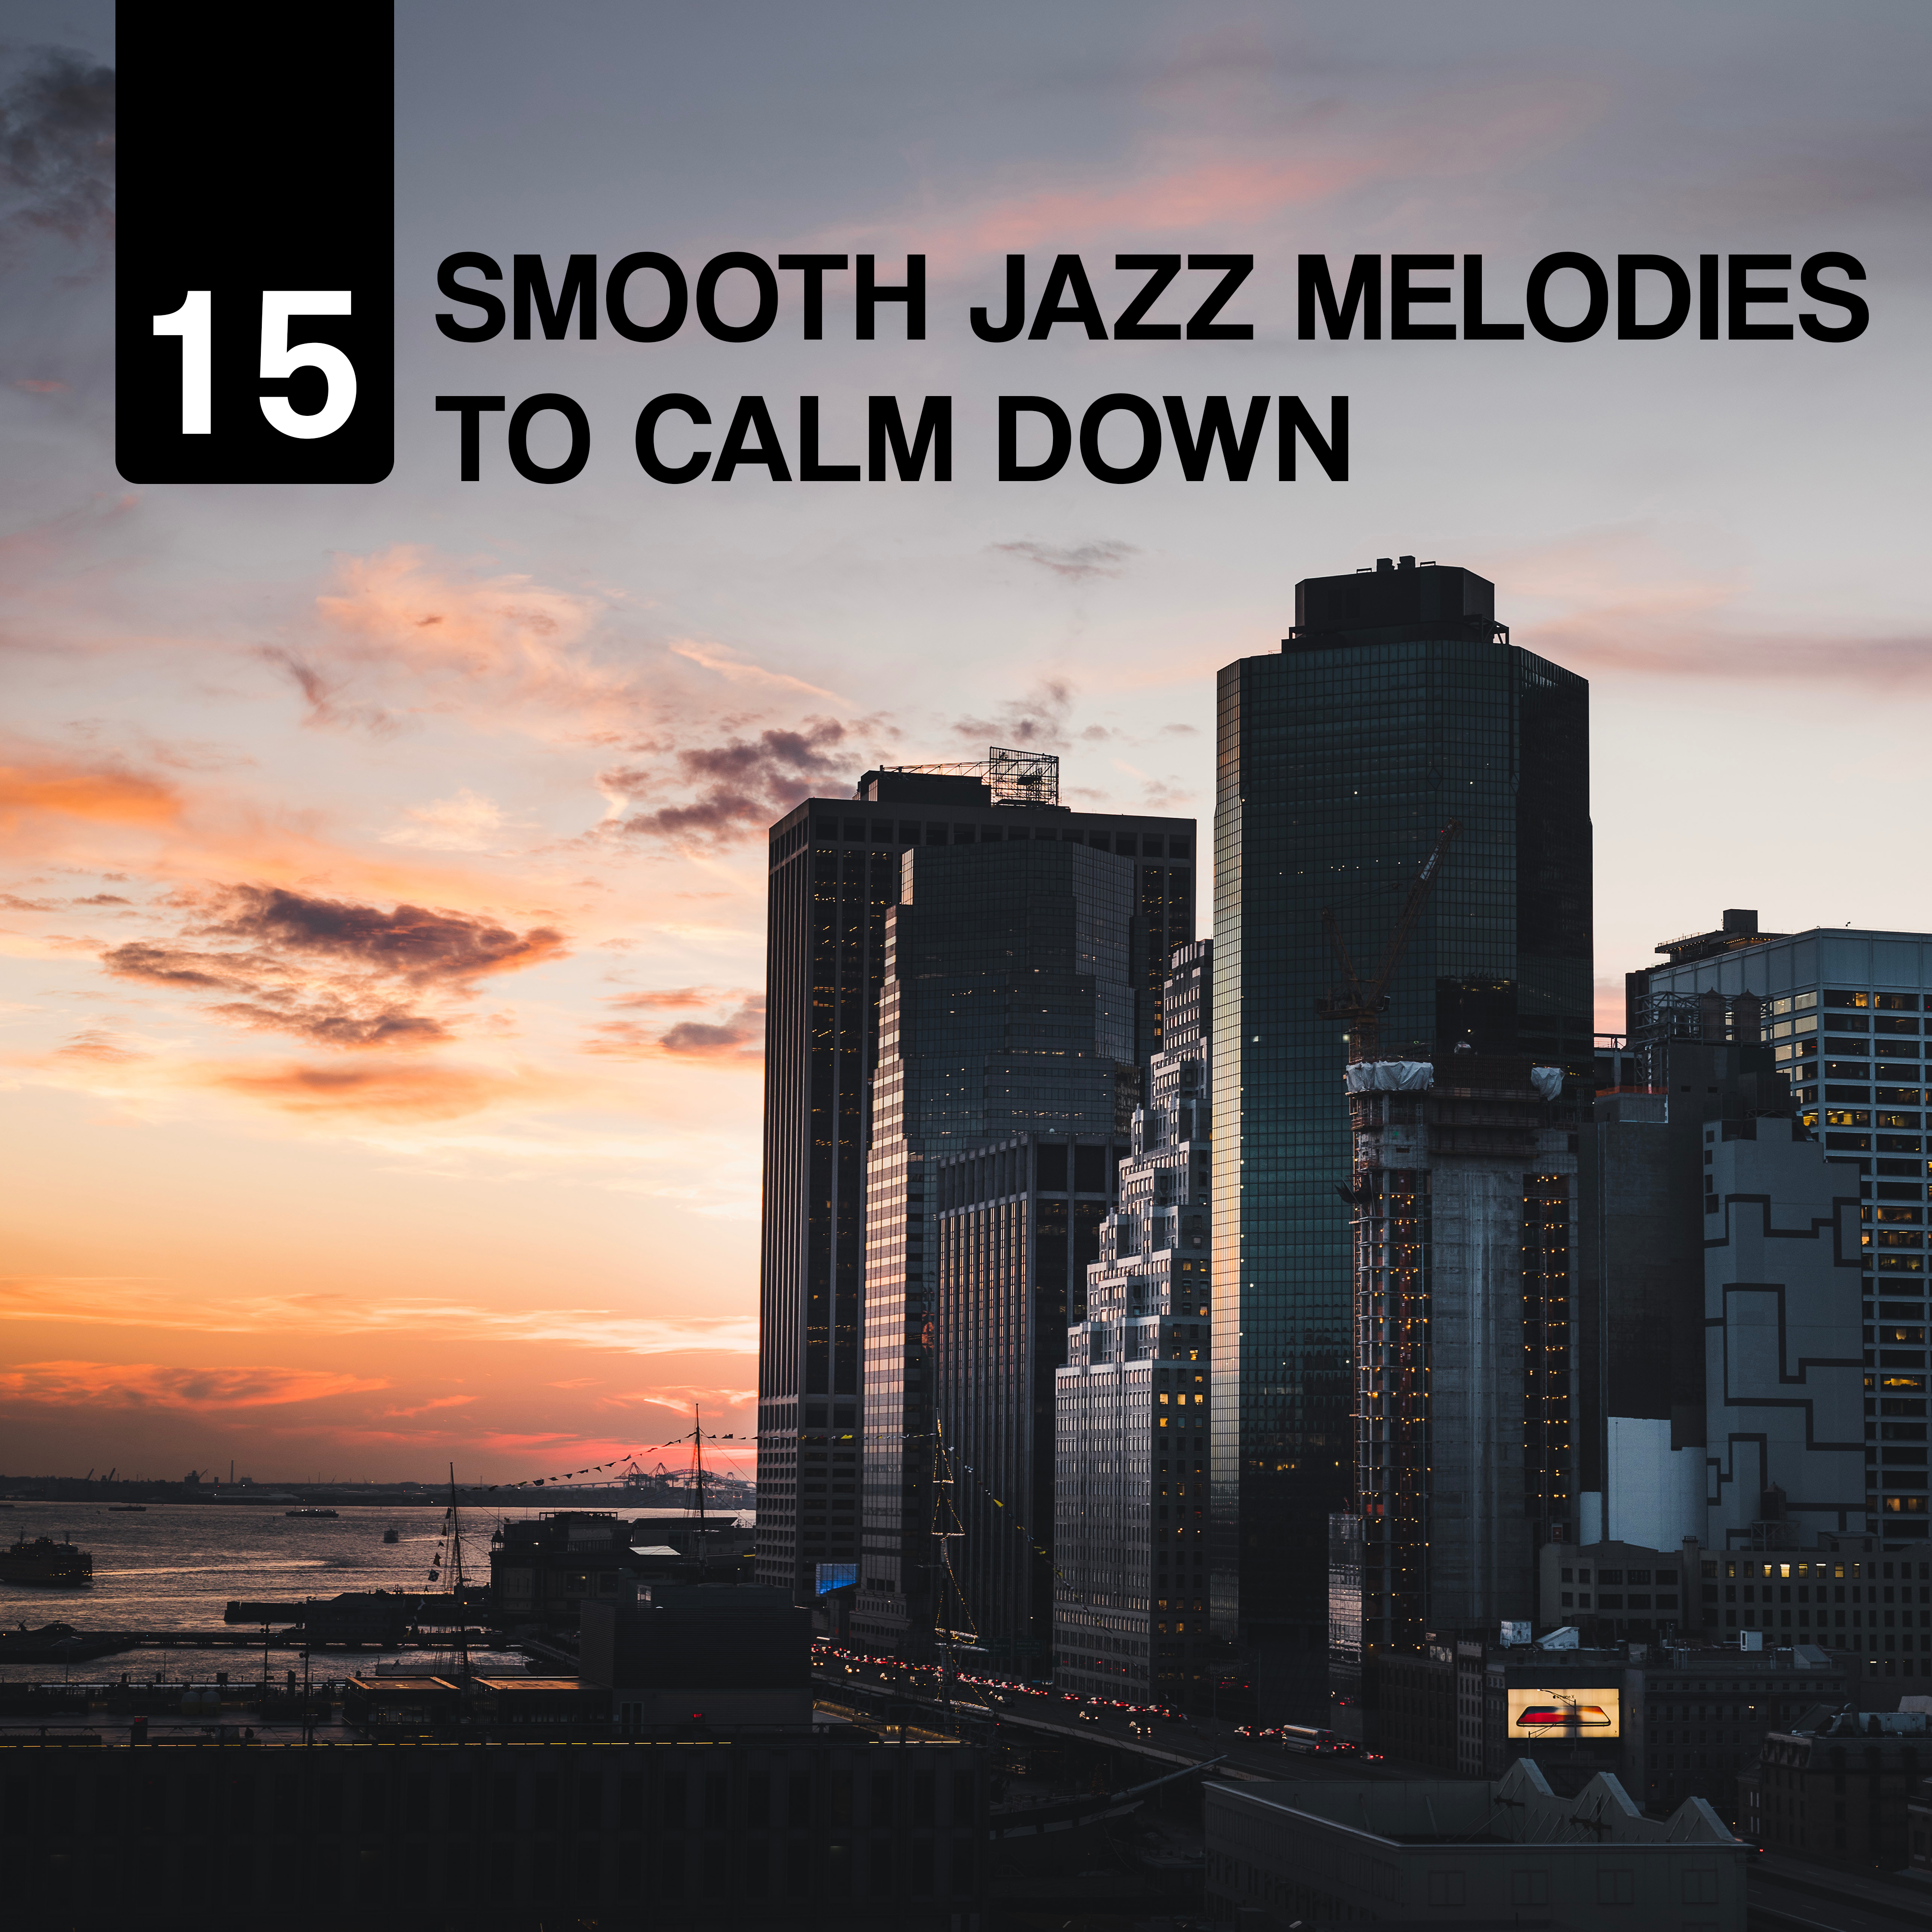 15 Smooth Jazz Melodies to Calm Down